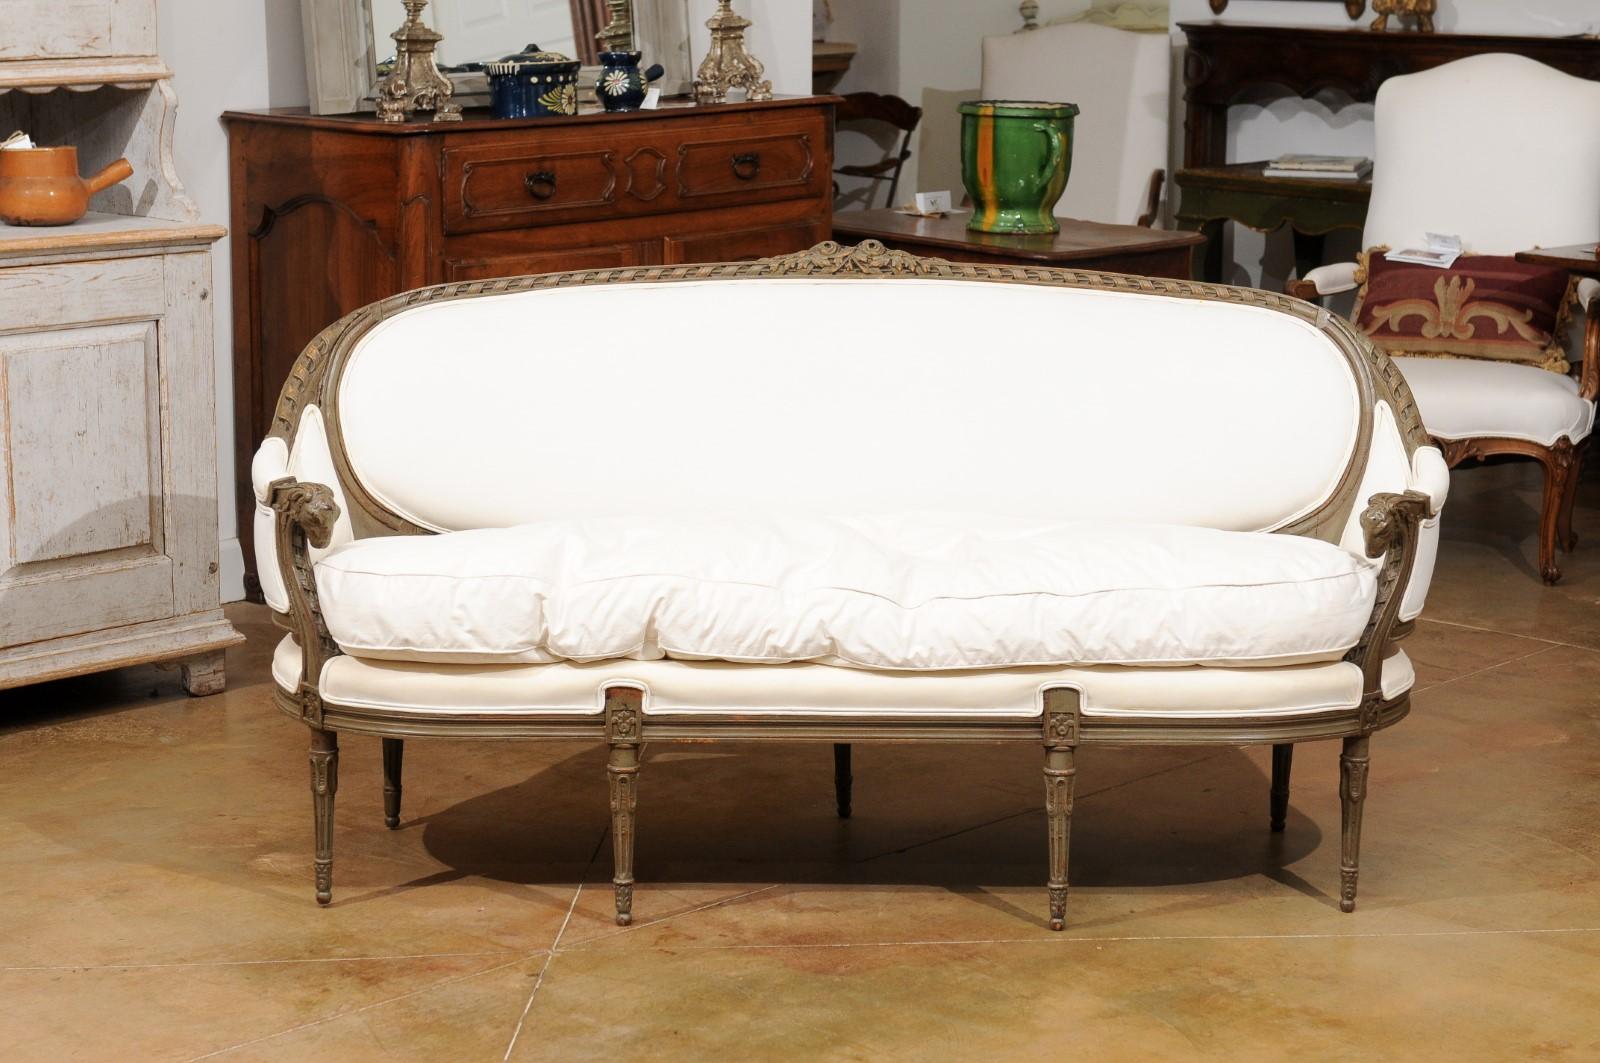 A French Louis XVI style painted wood canapé en corbeille from the 19th century, with carved rams' heads, twisted ribbons and new upholstery. Created in France during the 19th century, this sofa features a wraparound back with twisted ribbon on the